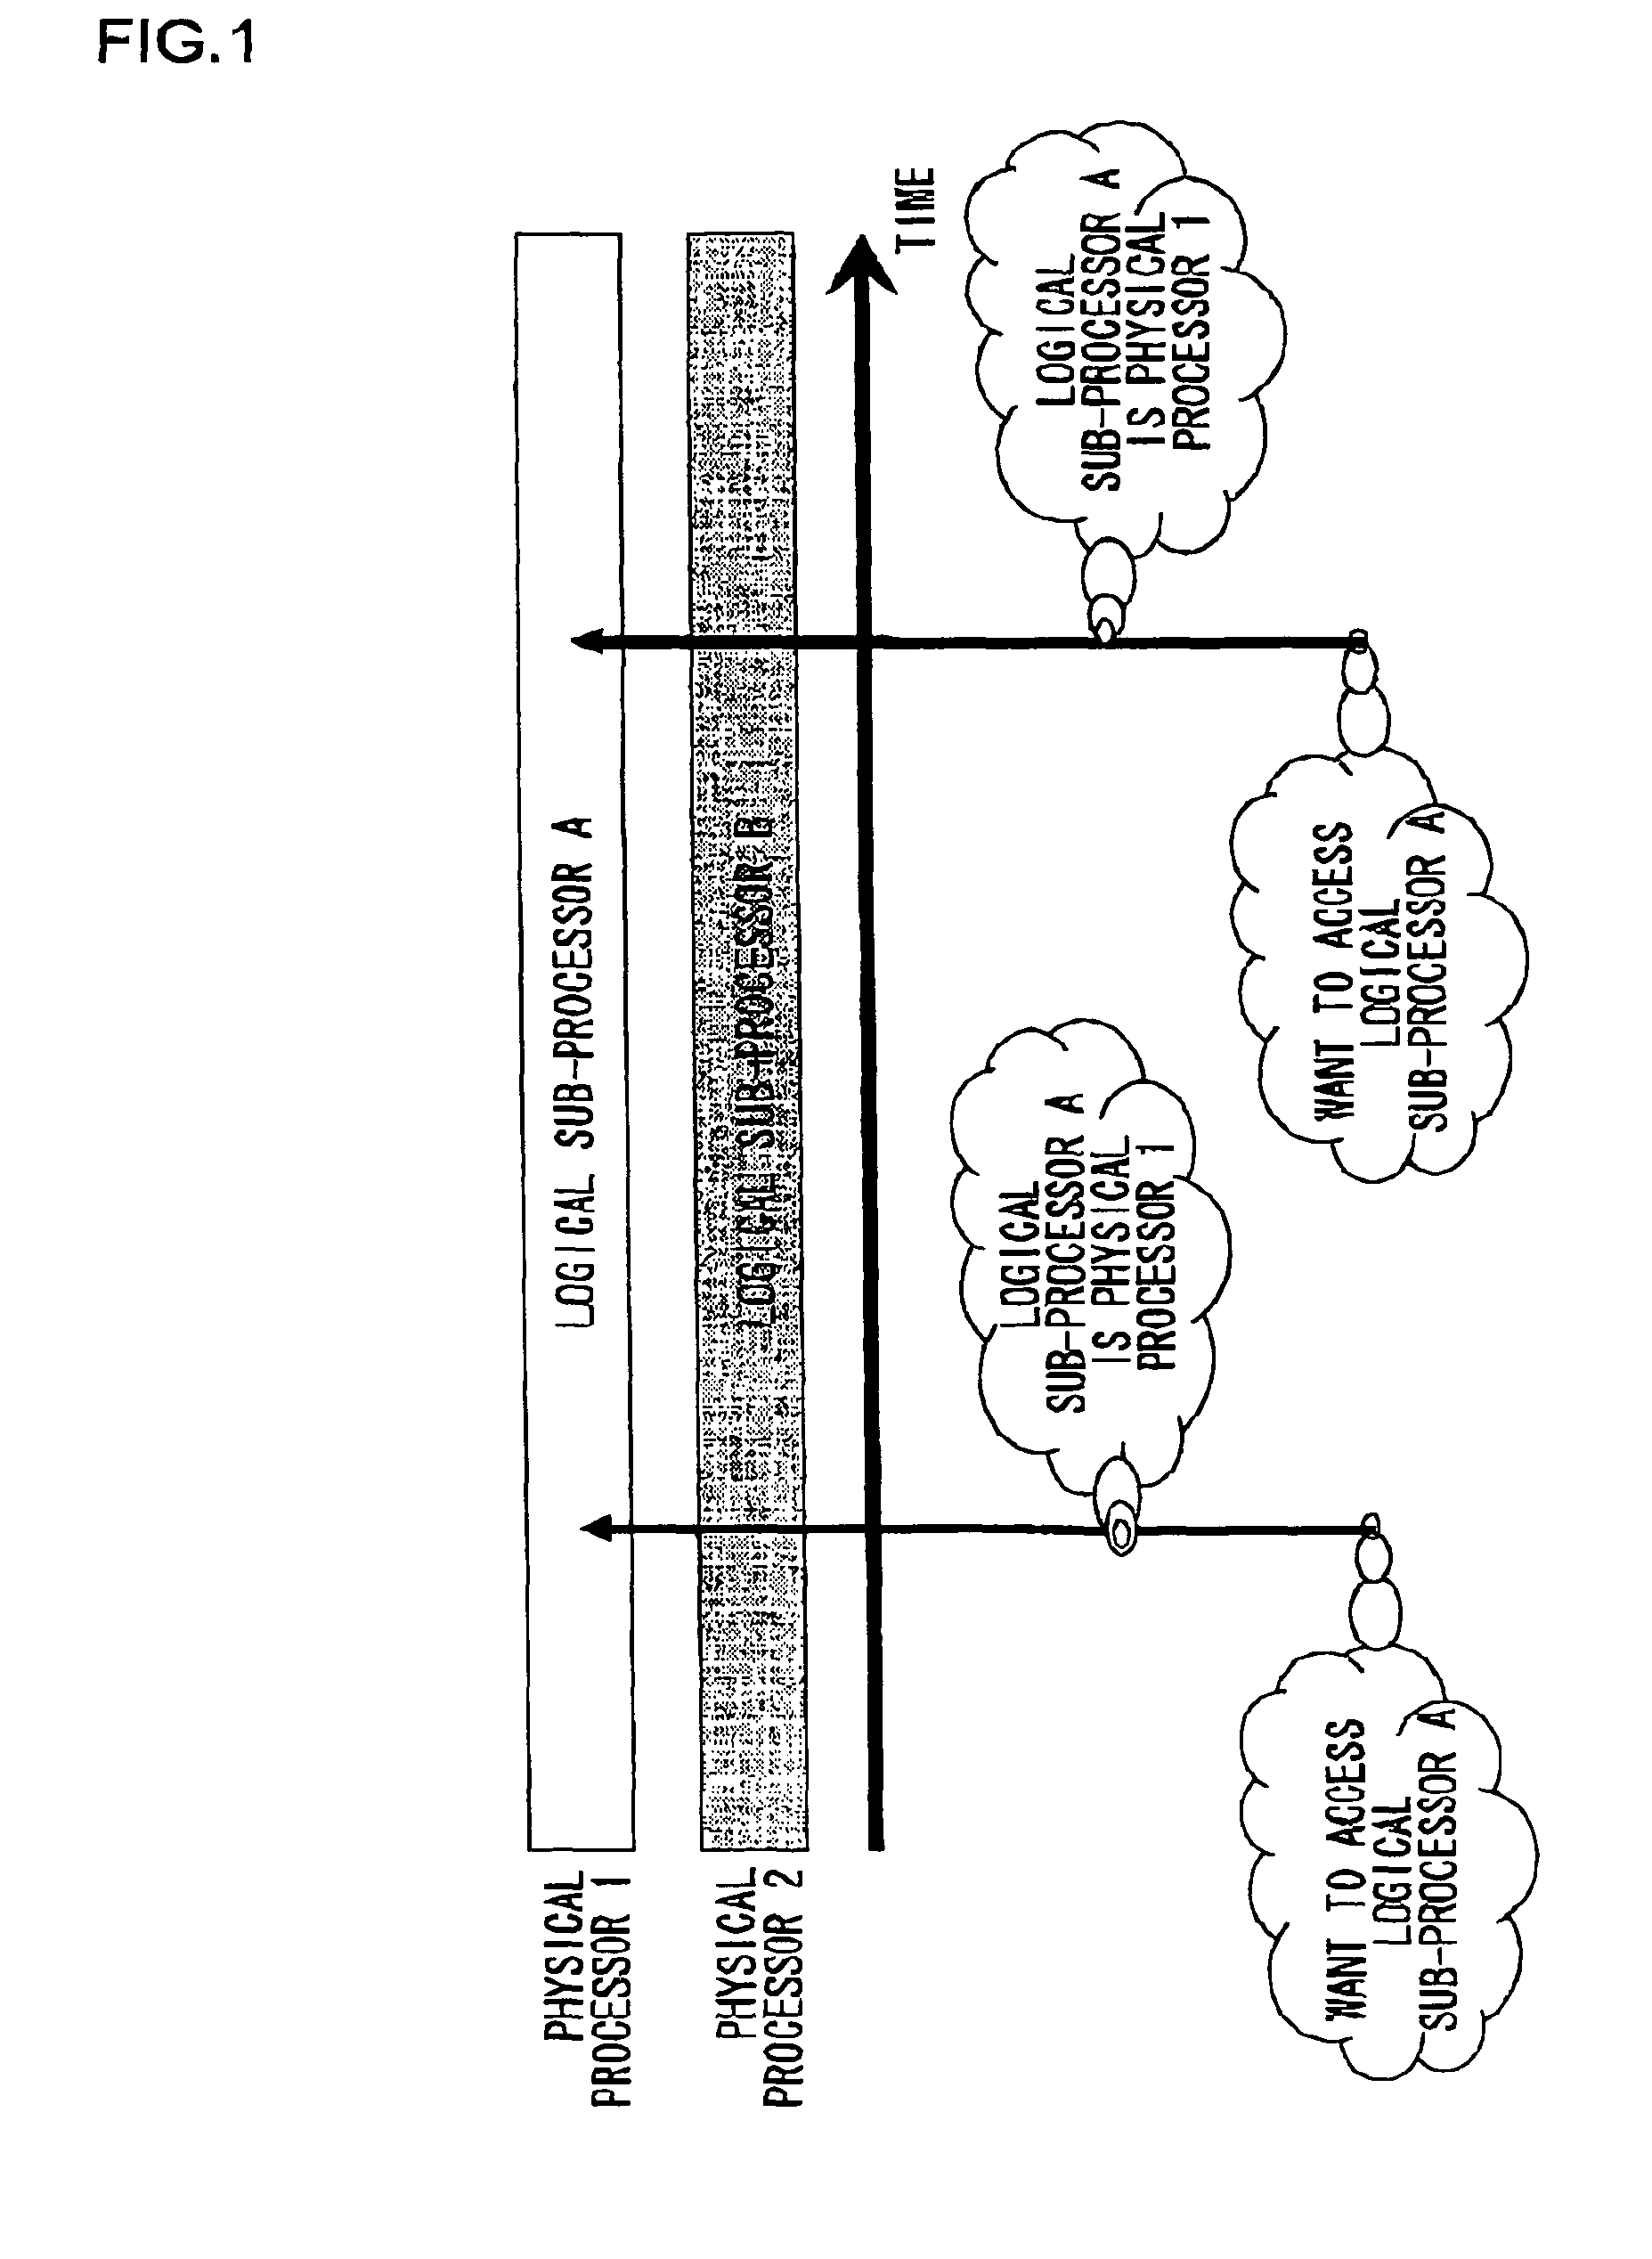 Accessing copy information of MMIO register by guest OS in both active and inactive state of a designated logical processor corresponding to the guest OS